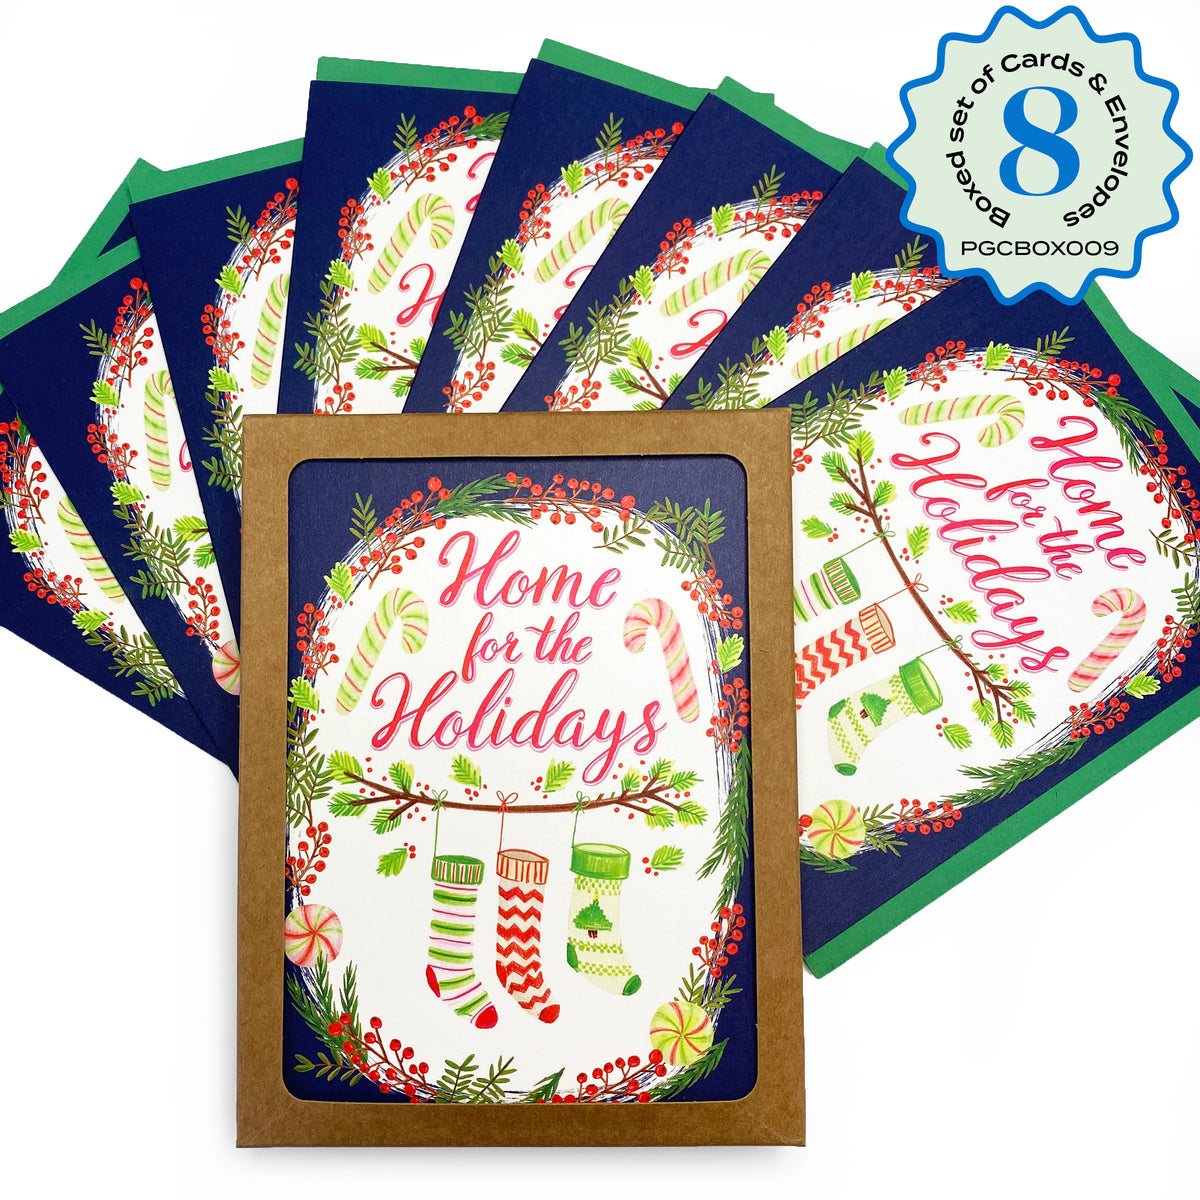 Boxed Set of 8 Cards-Home for the Holidays Greeting Cards